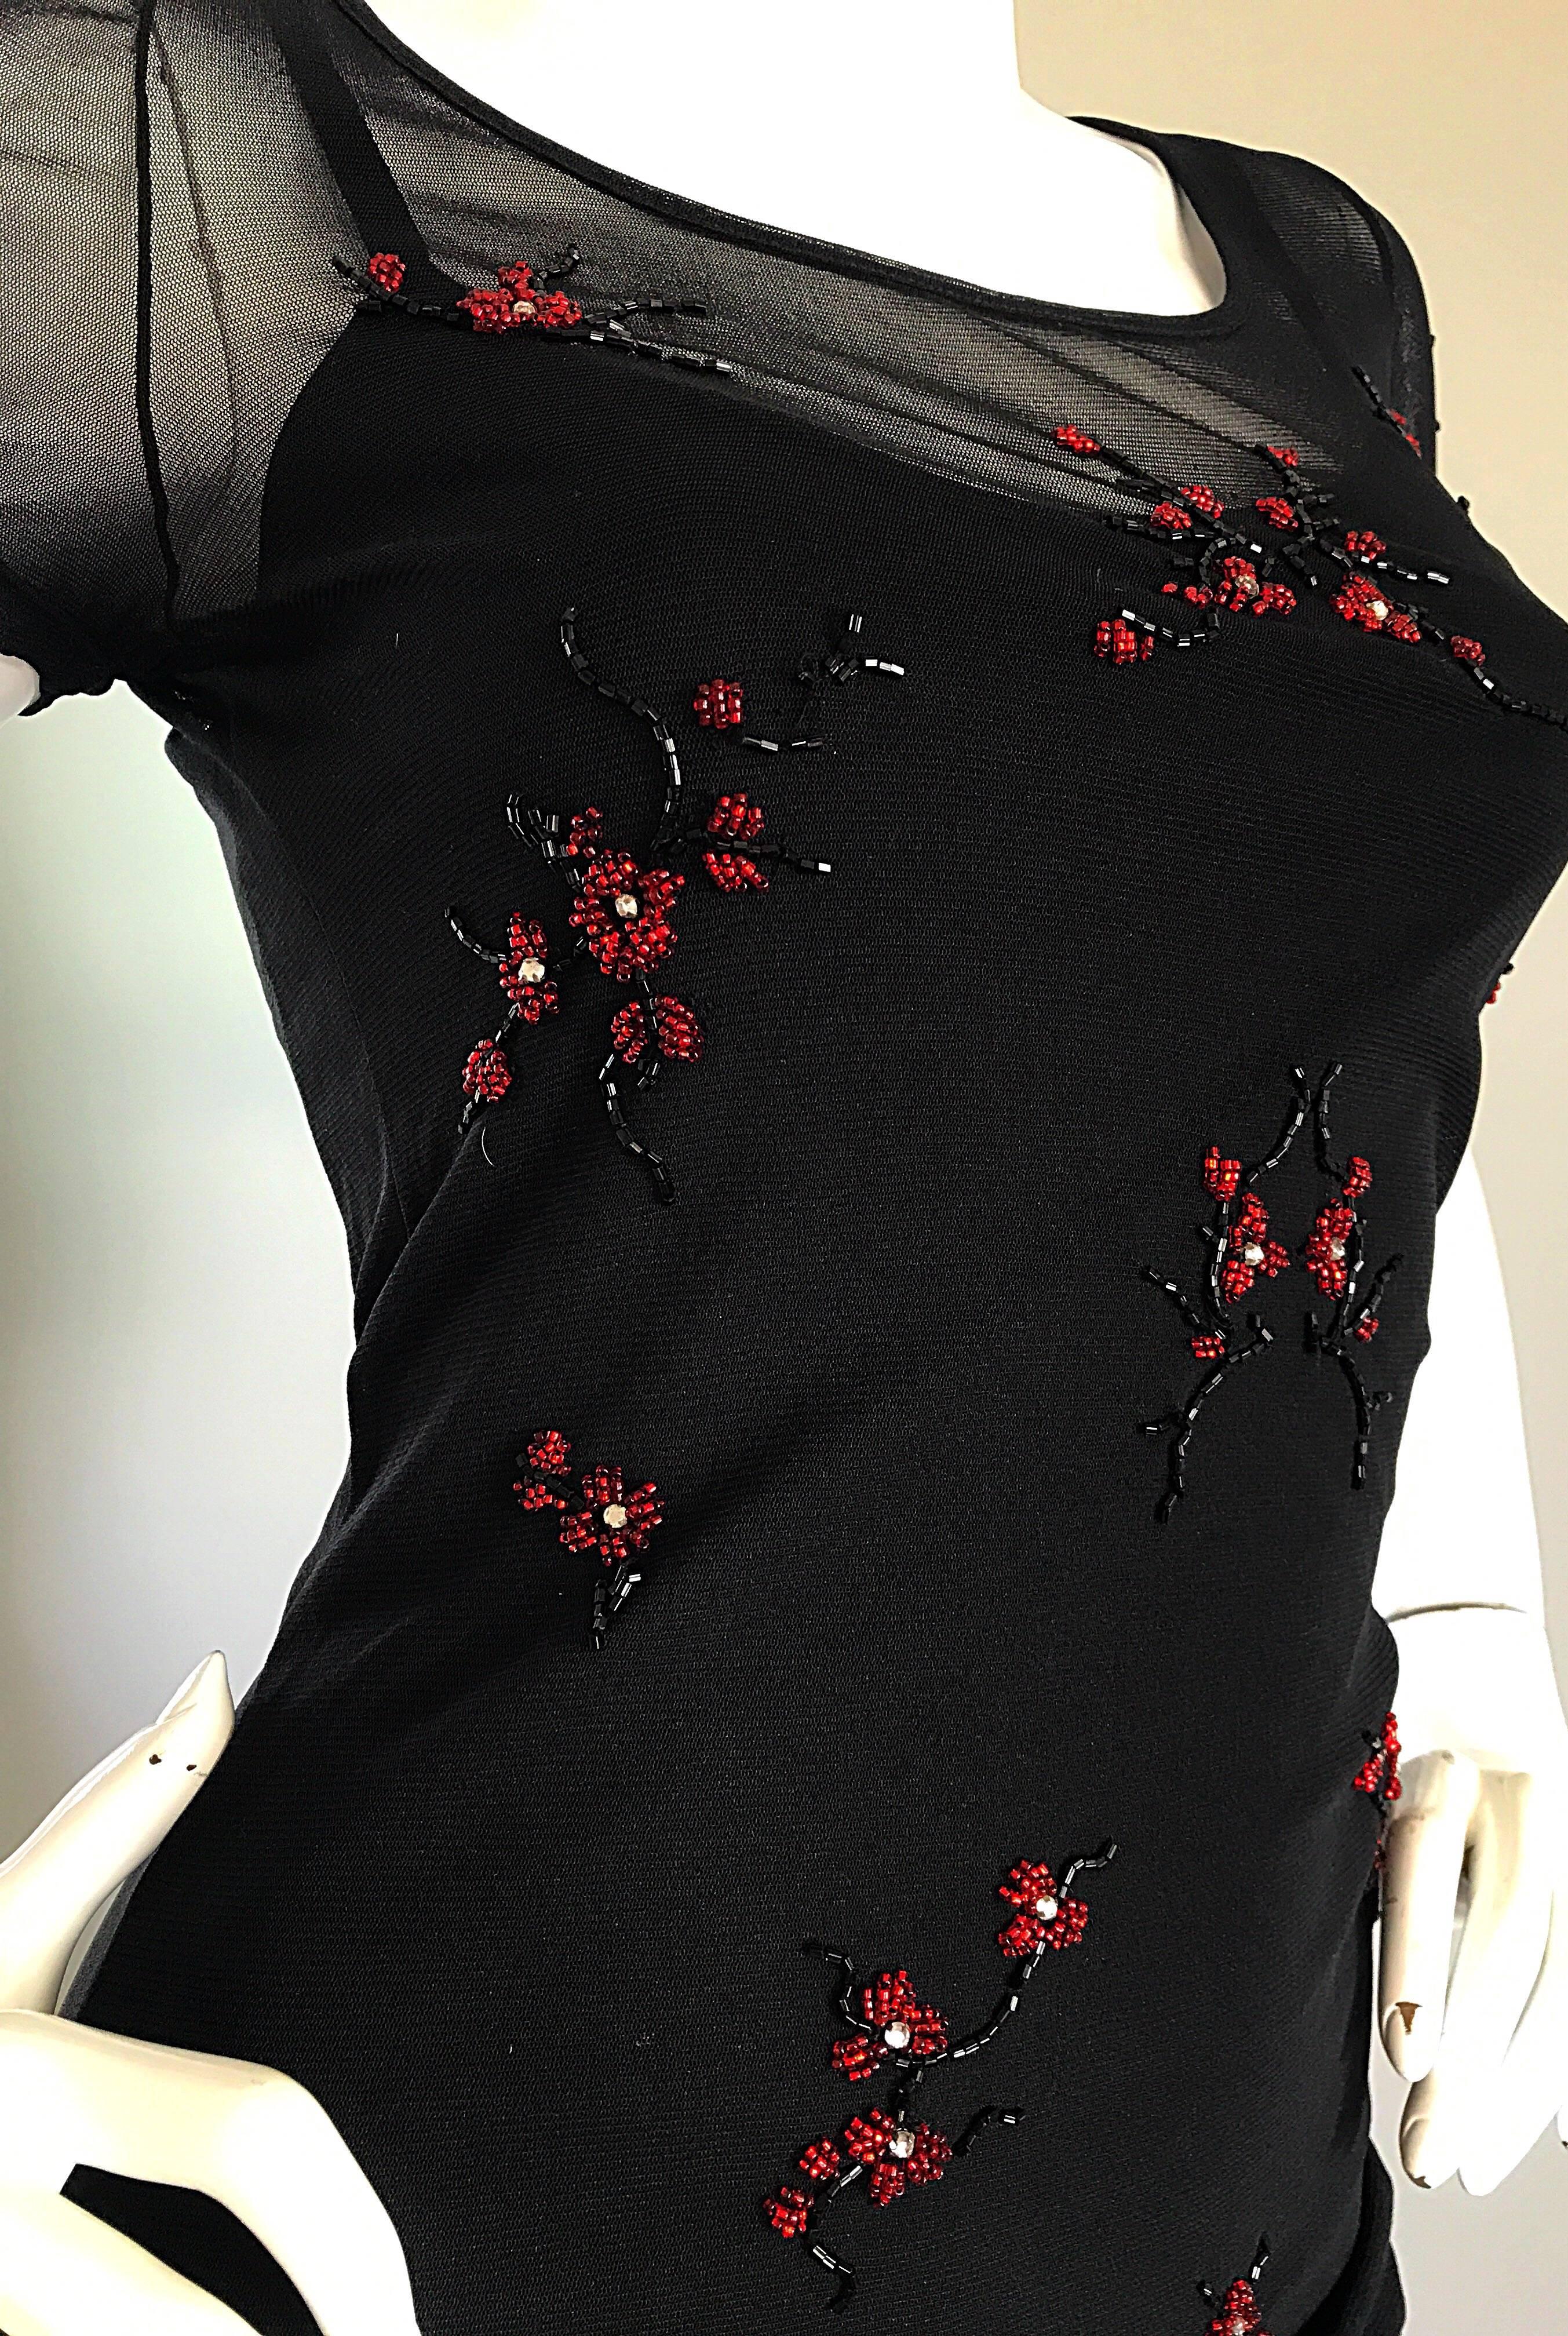 Beautiful vintage 1990s VIVIENNE TAM black and red beaded semi sheer midi dress and matching slip! Features thousands of 
hand-sewn red and black seed beads and rhinestones with an Asian influence. Wonderful form fitting silhouette stretches to fit.